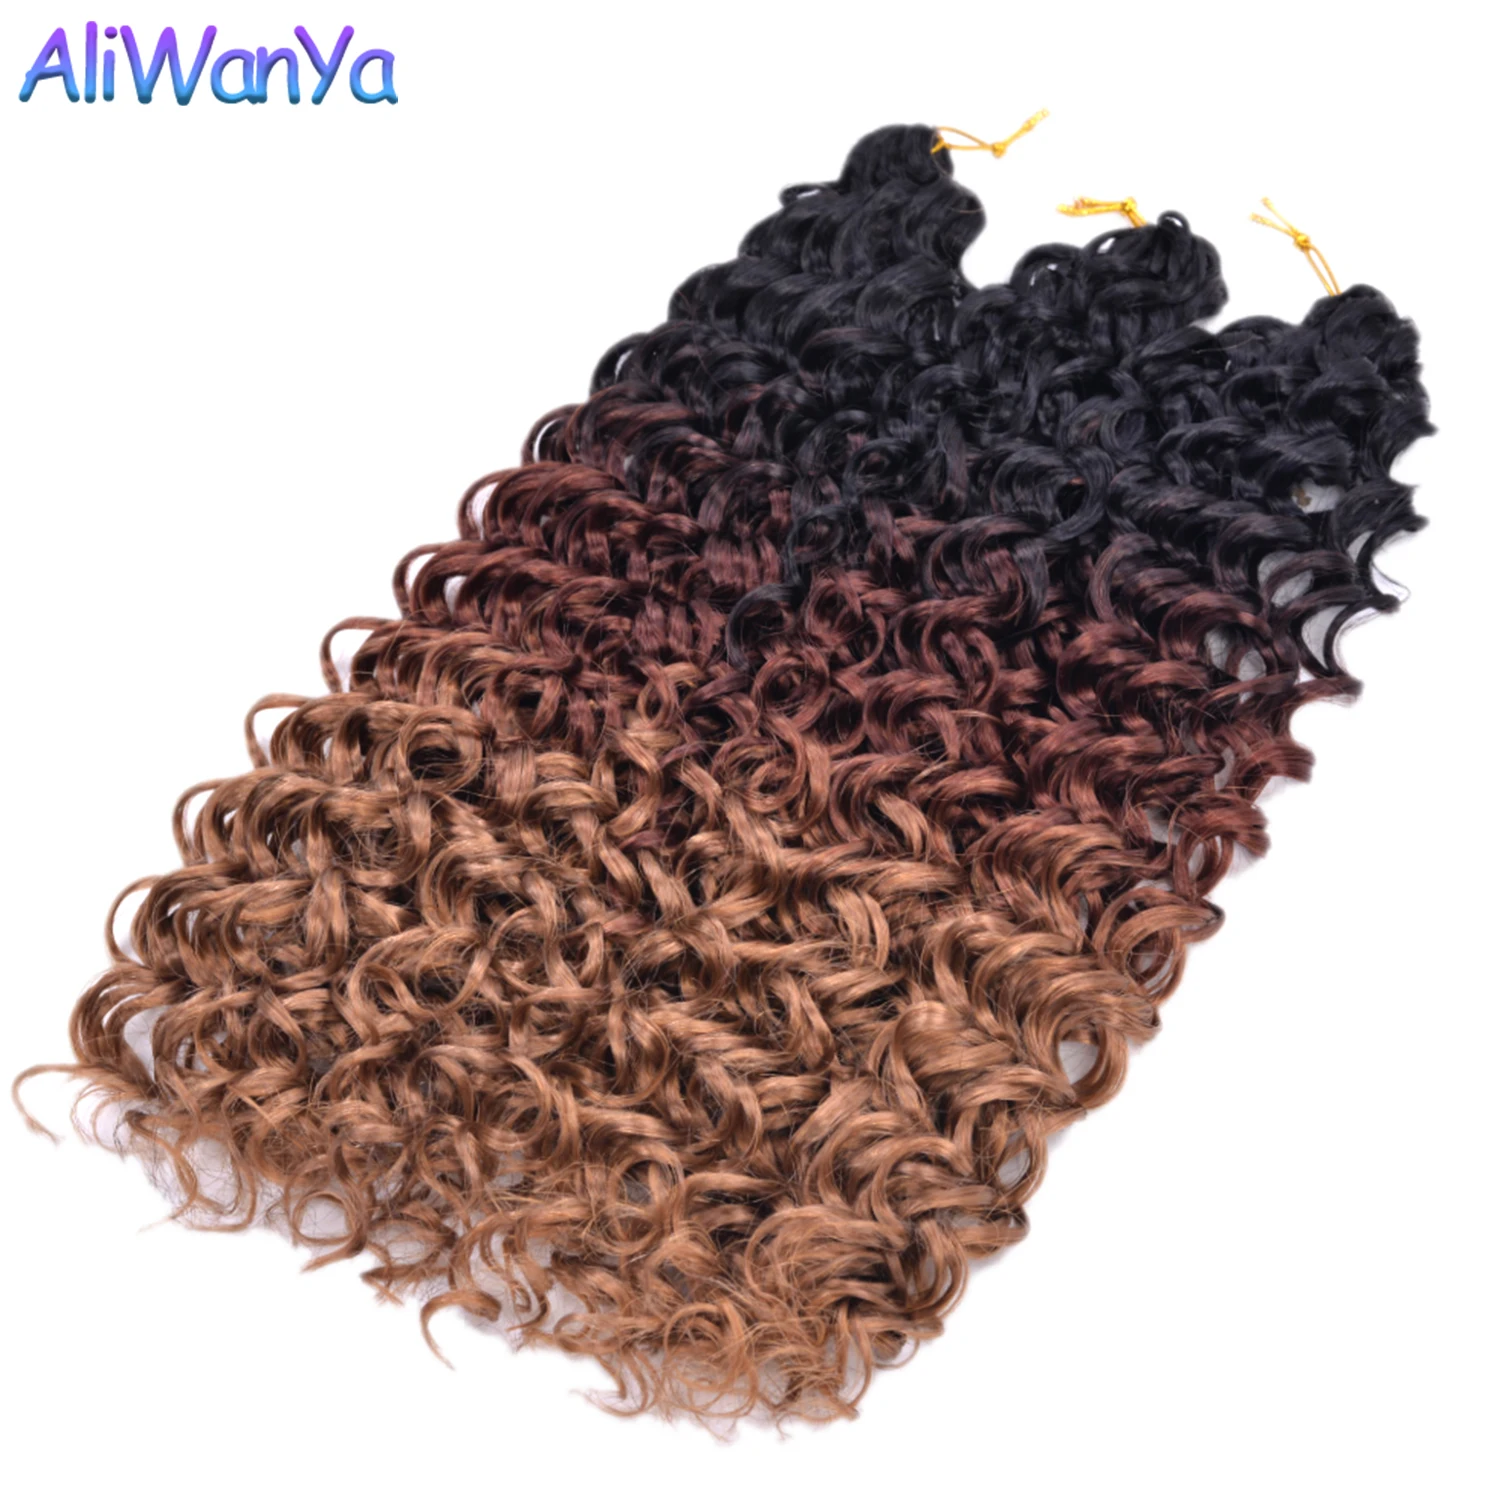 Synthetic Crochet Braiding Hair Ombre GoGo Curl Curly Natural Hair Extensions Wavy Braiding Hair For Women Kids Black  Aliwanya